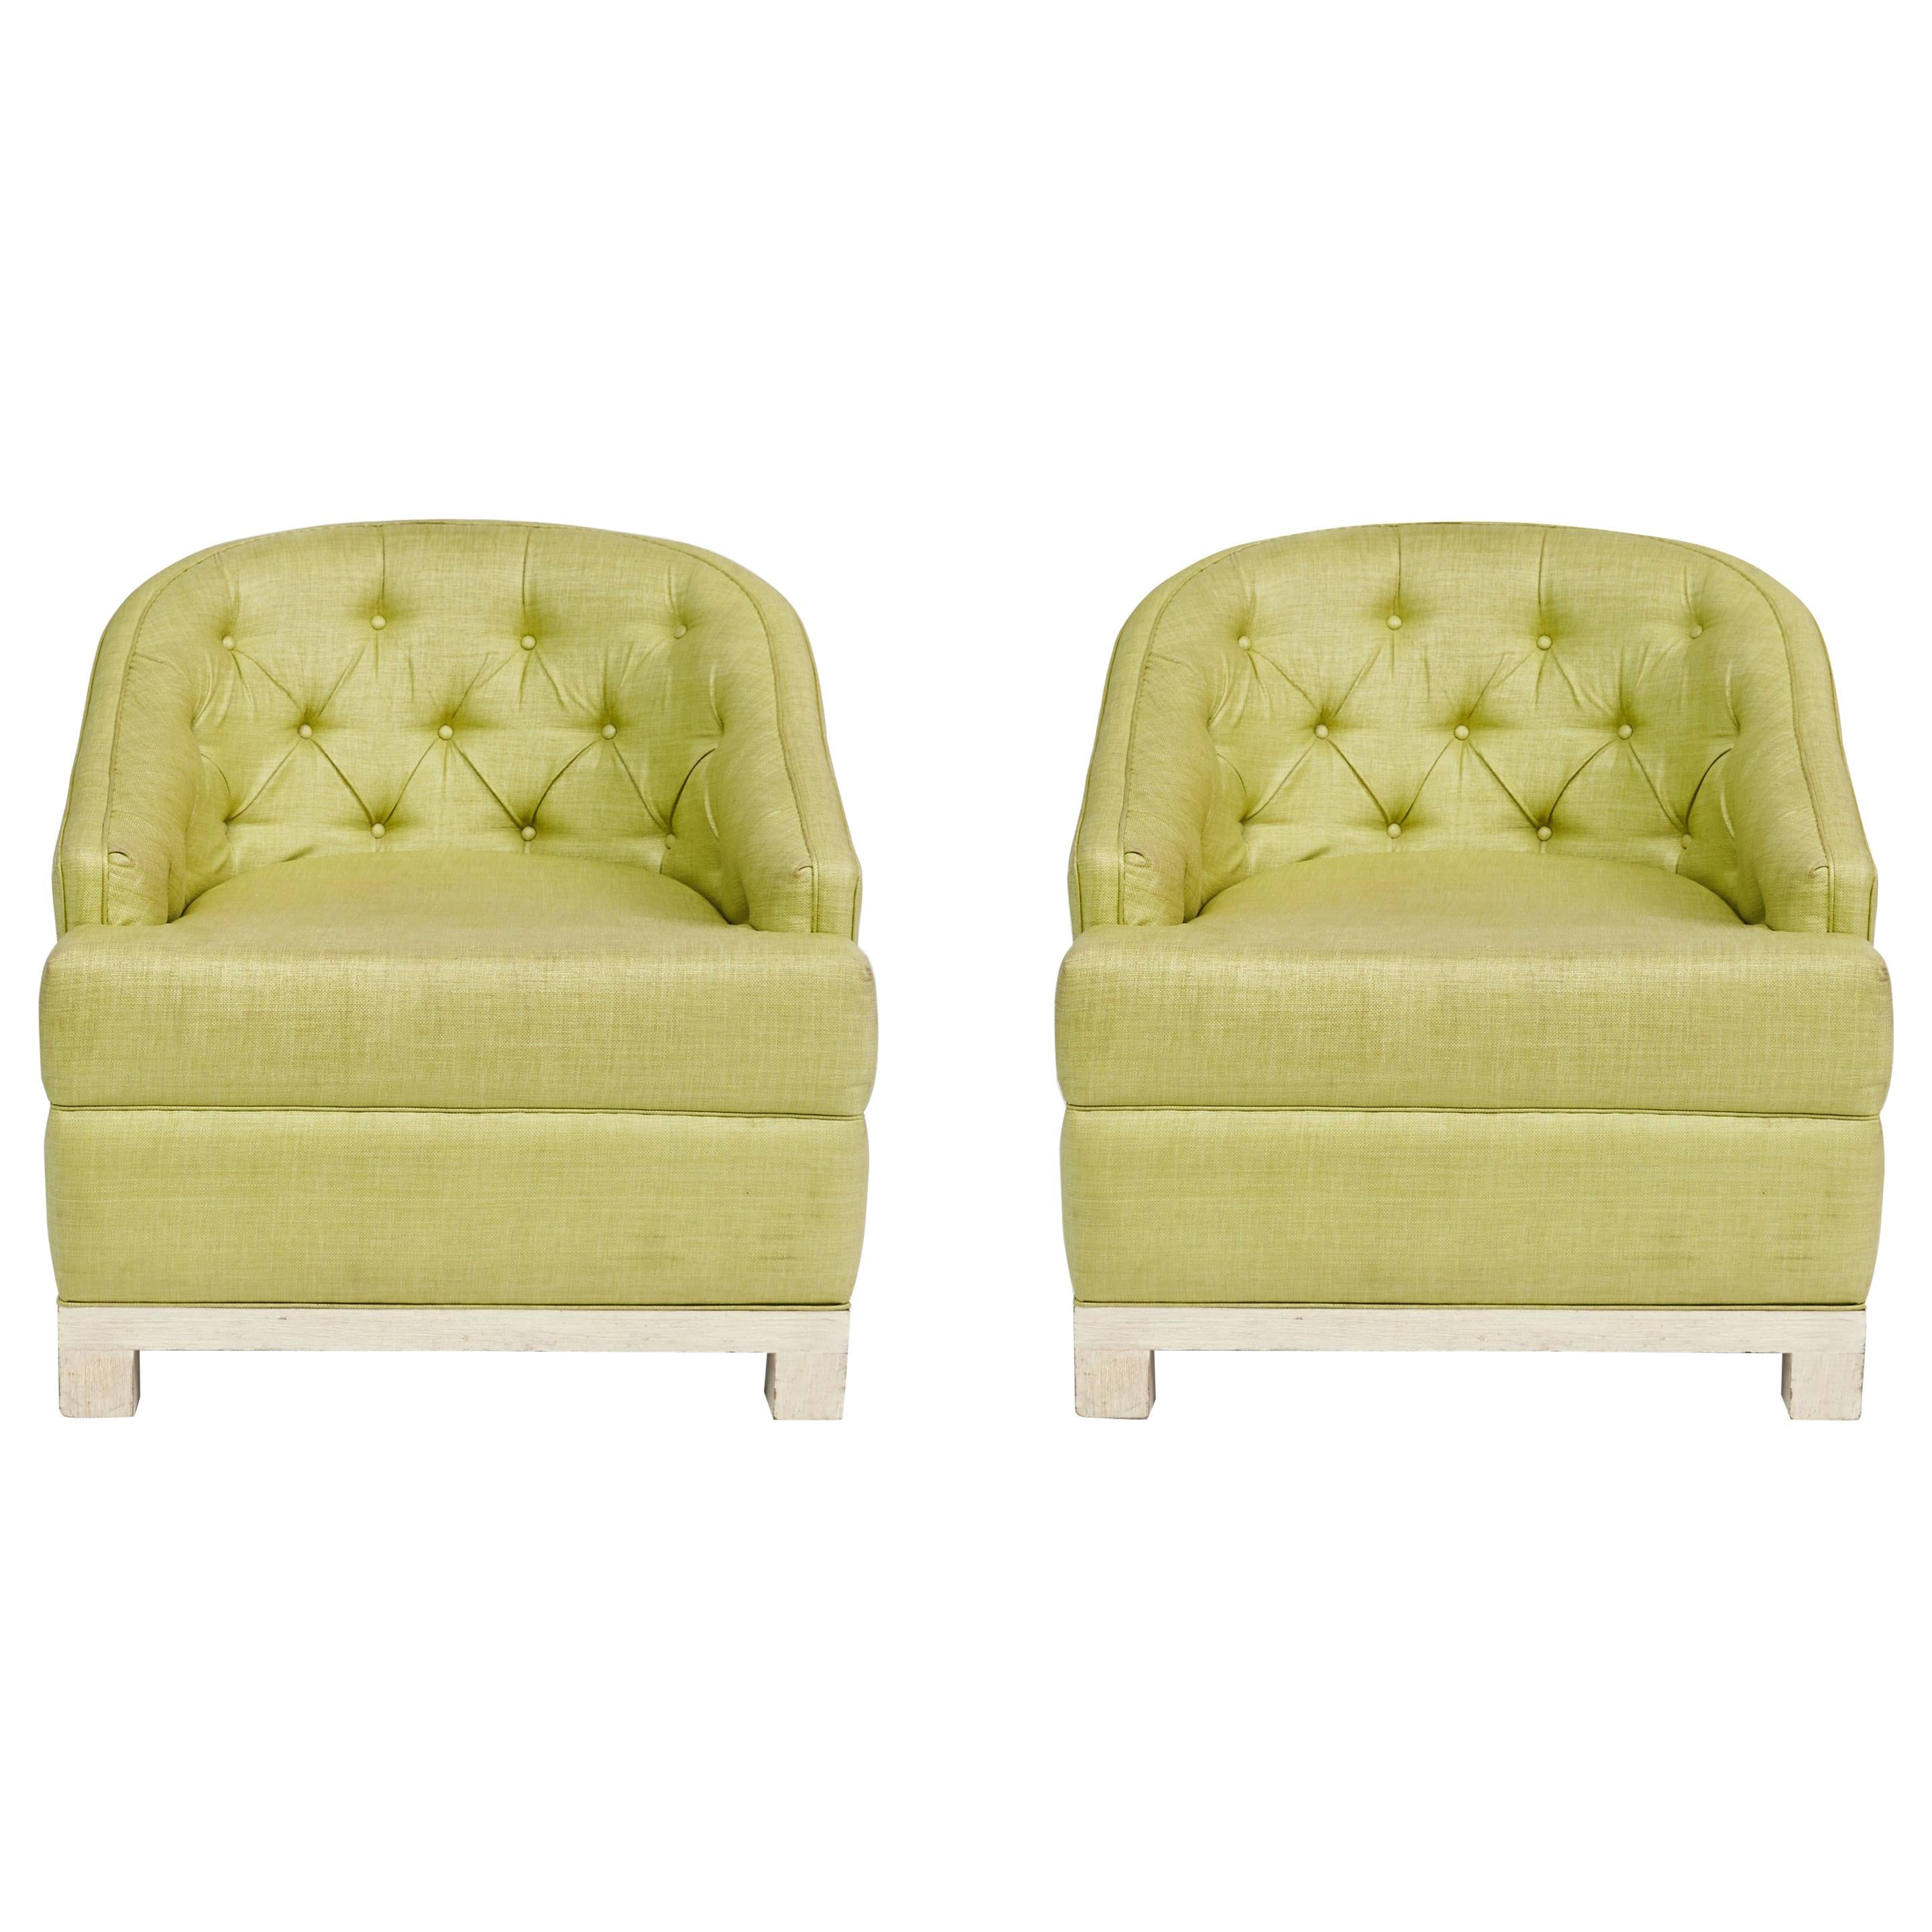 Pair of Hollywood Regency Club Chairs from the Viceroy Miami